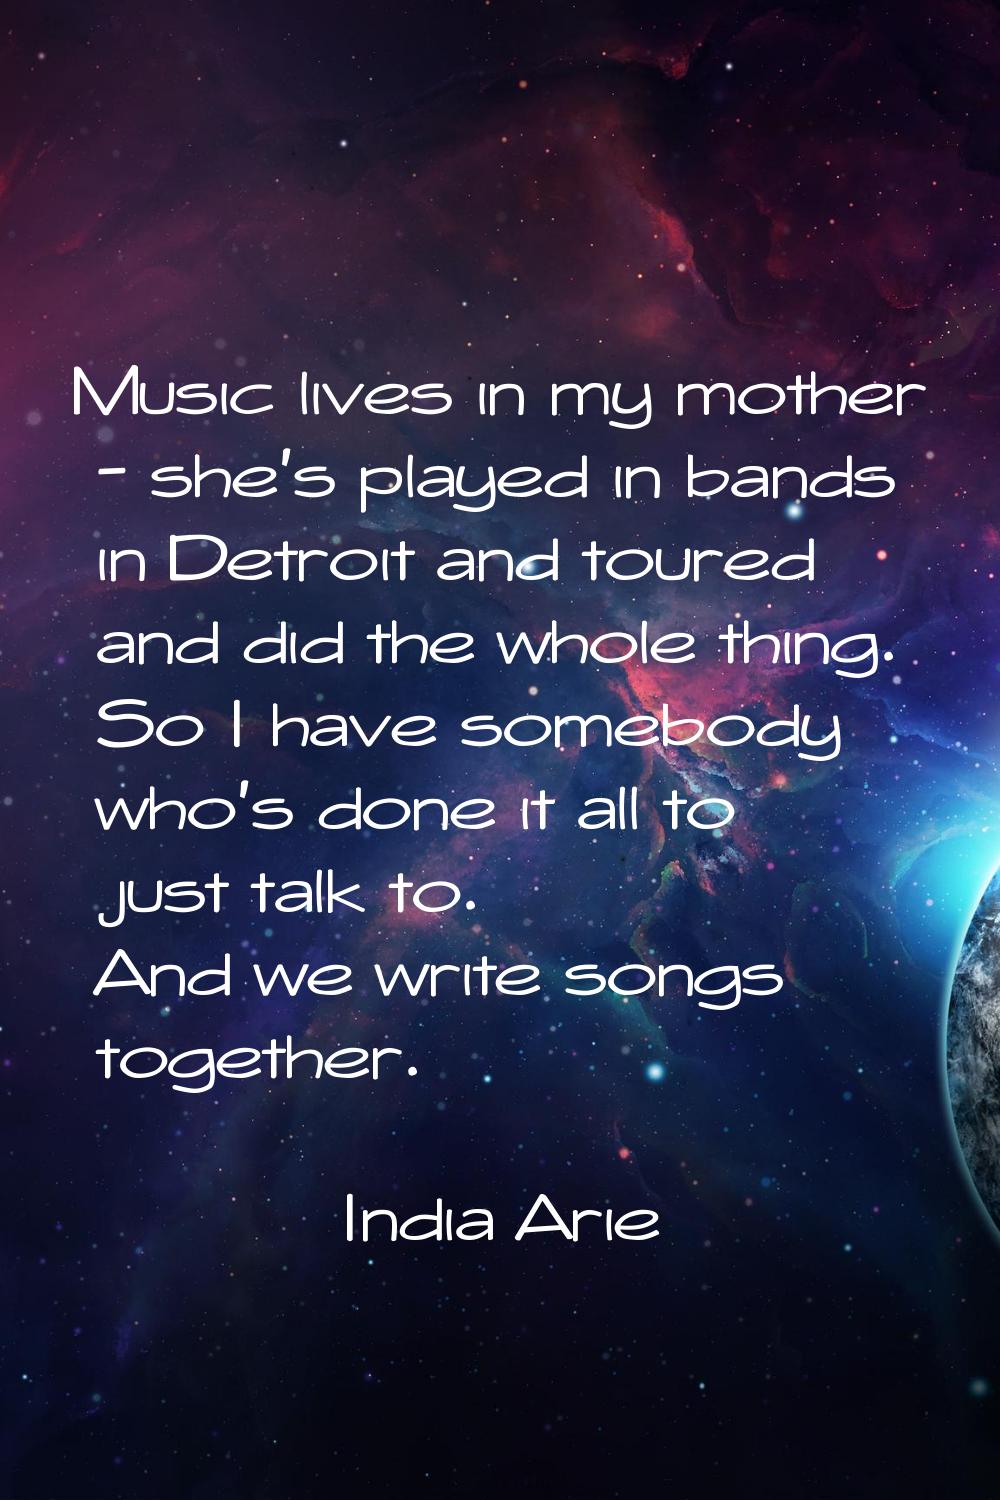 Music lives in my mother - she's played in bands in Detroit and toured and did the whole thing. So 